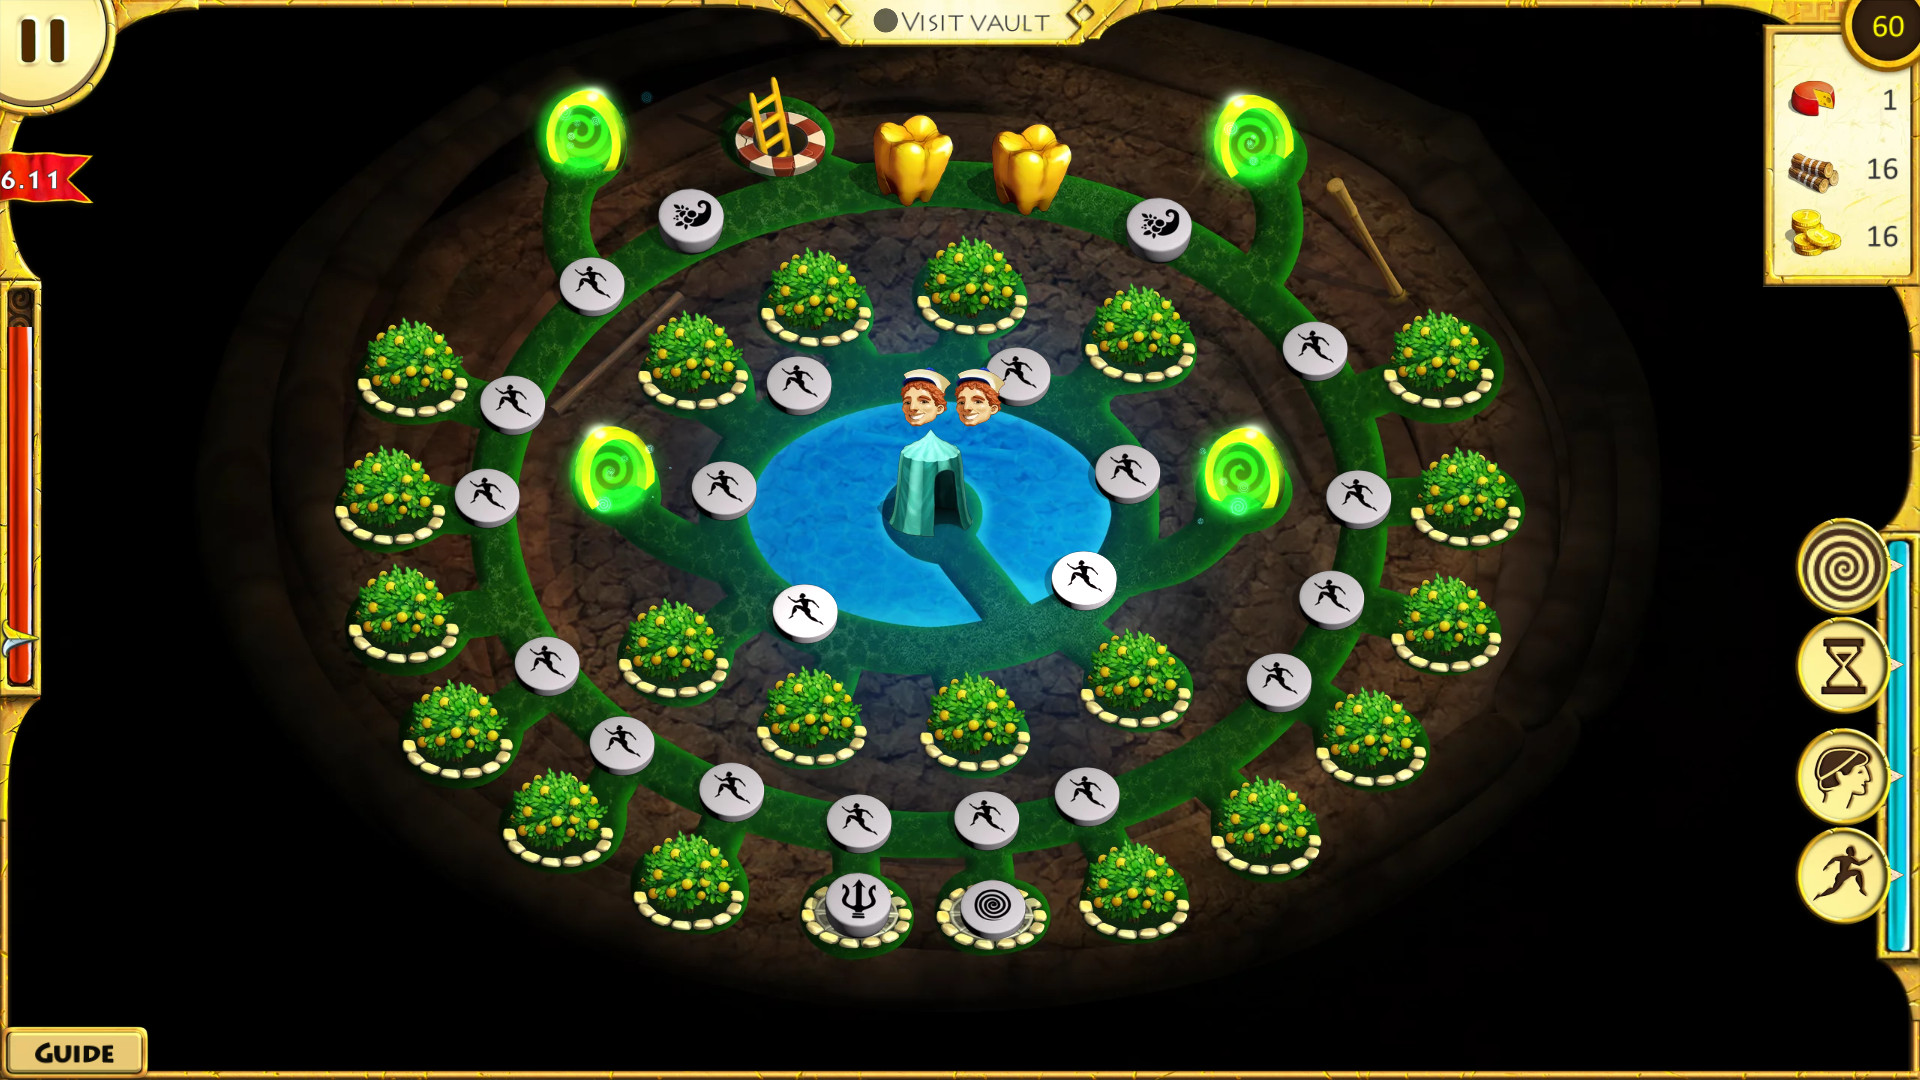 12 Labours of Hercules X: Greed for Speed screenshot